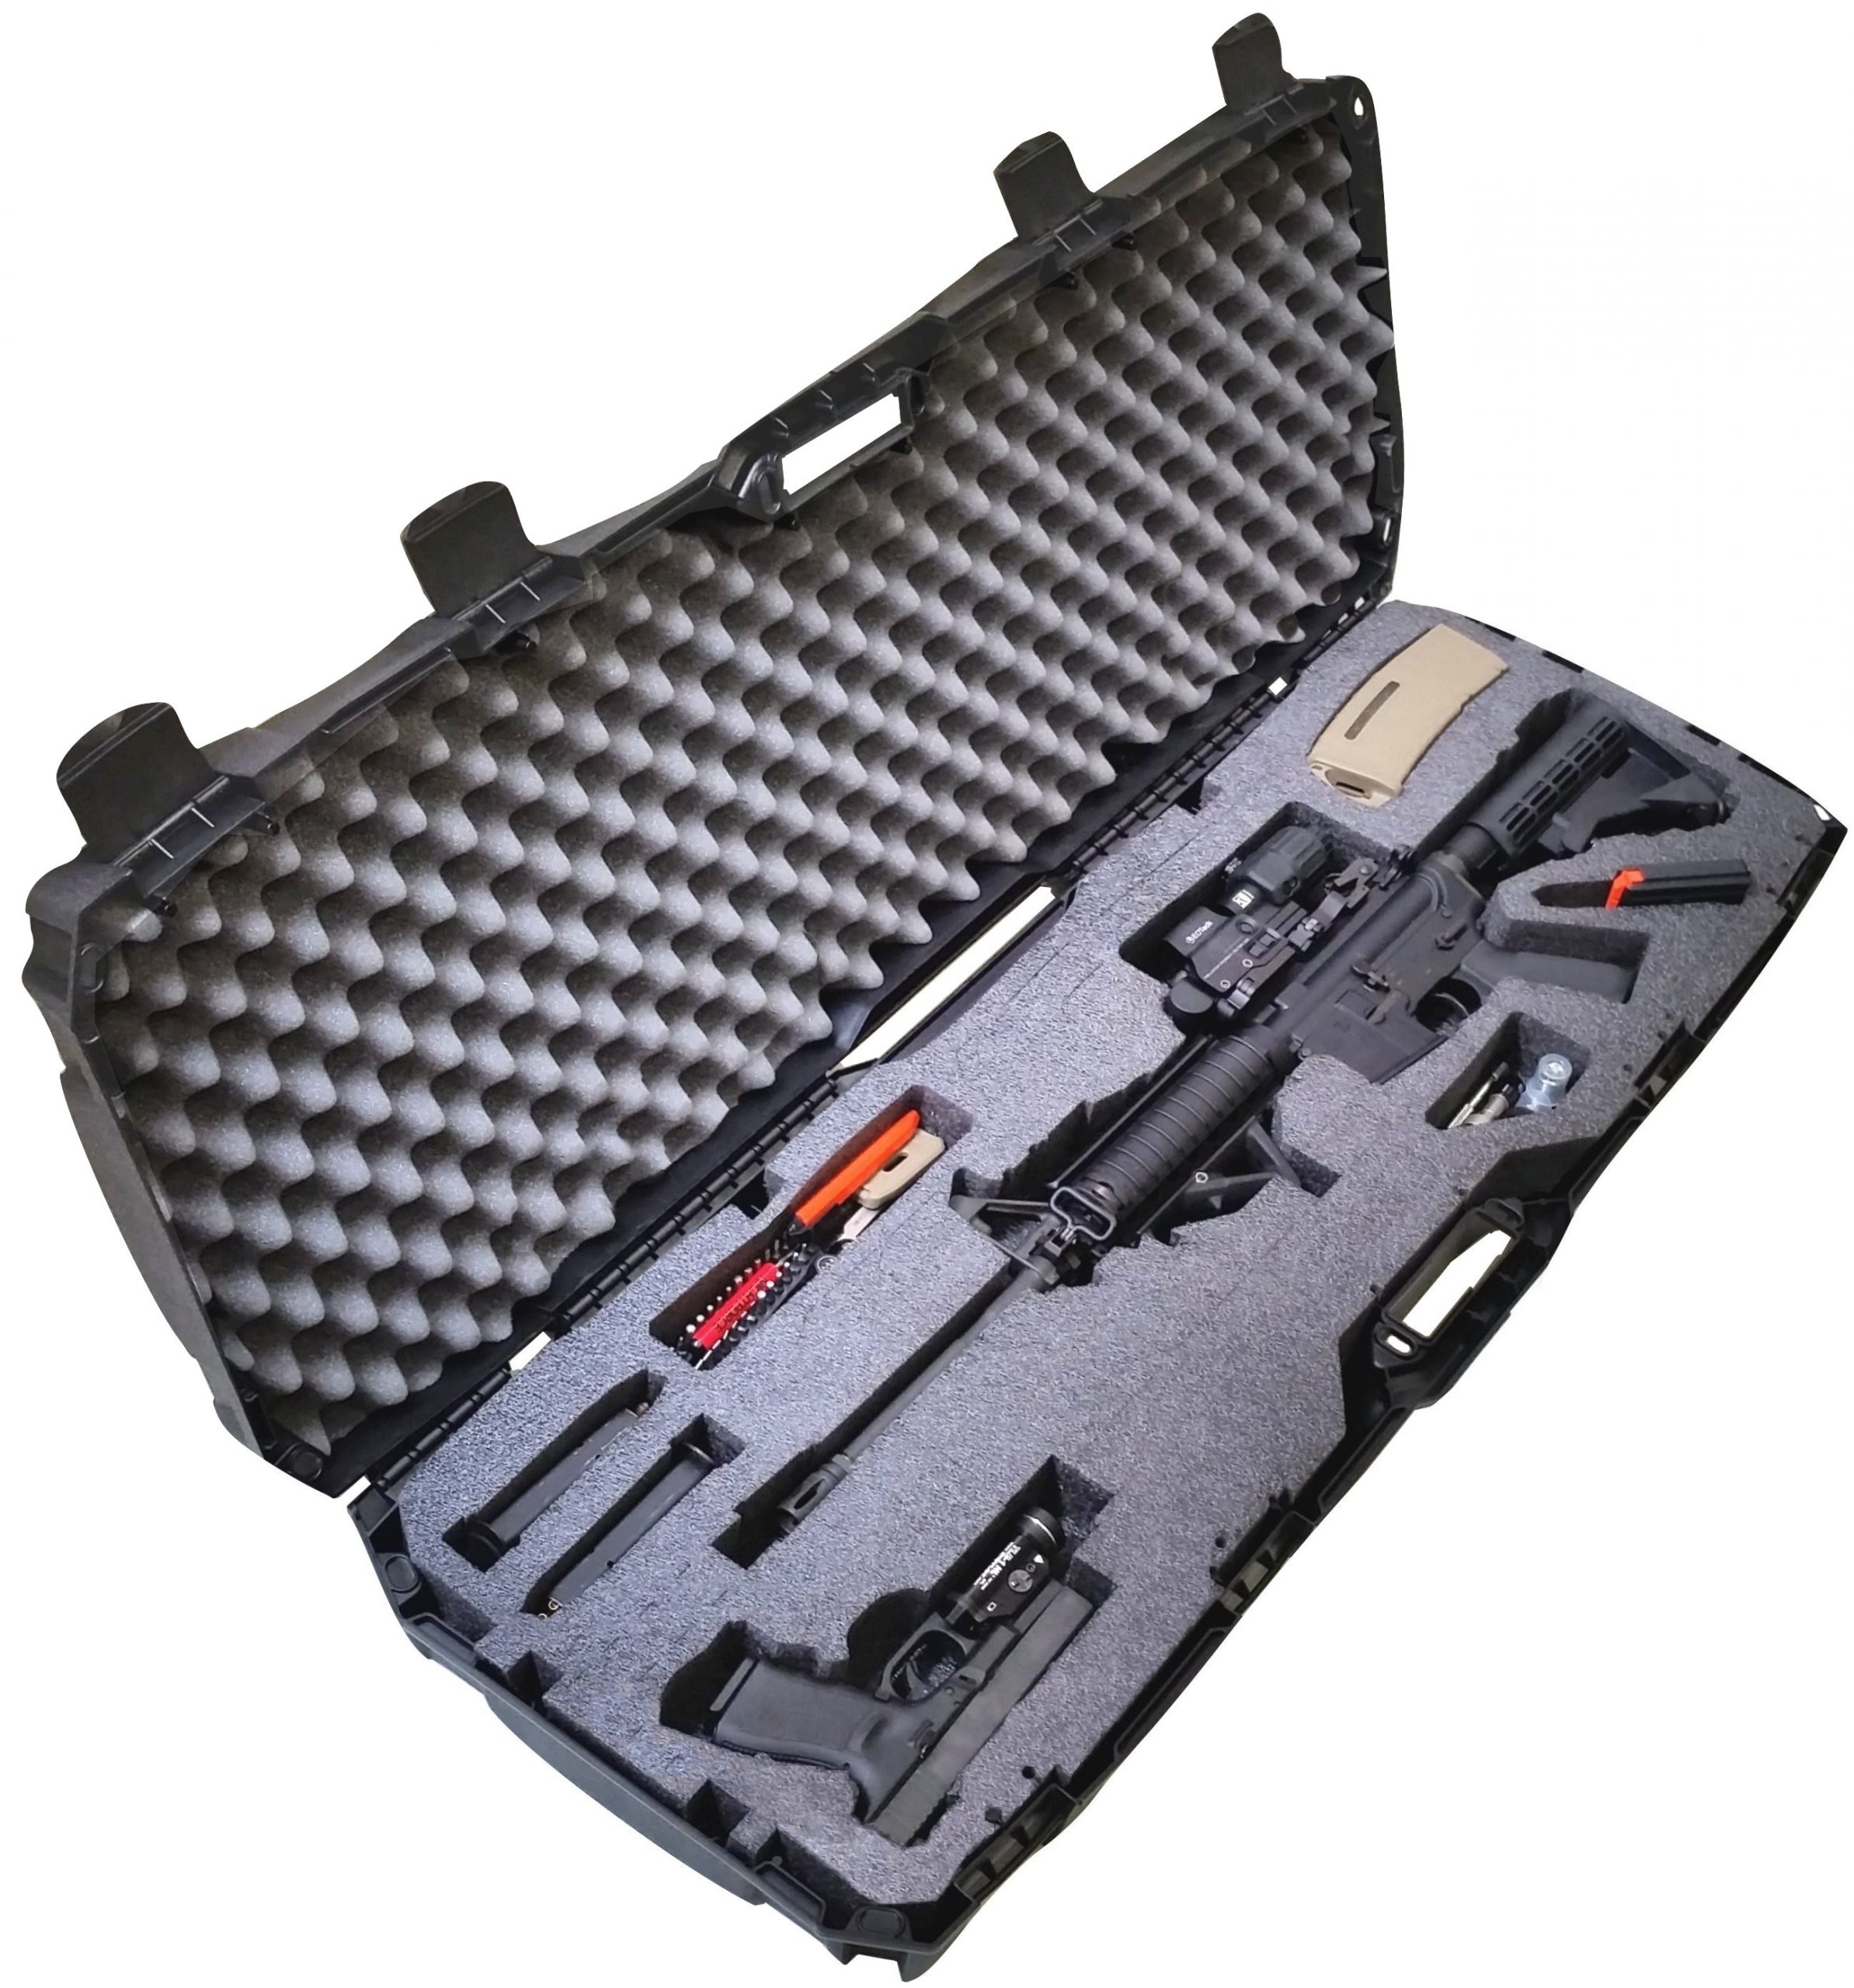 Case Club AR15 Rifle Carry Case for Rifle, Pistol & Magazines